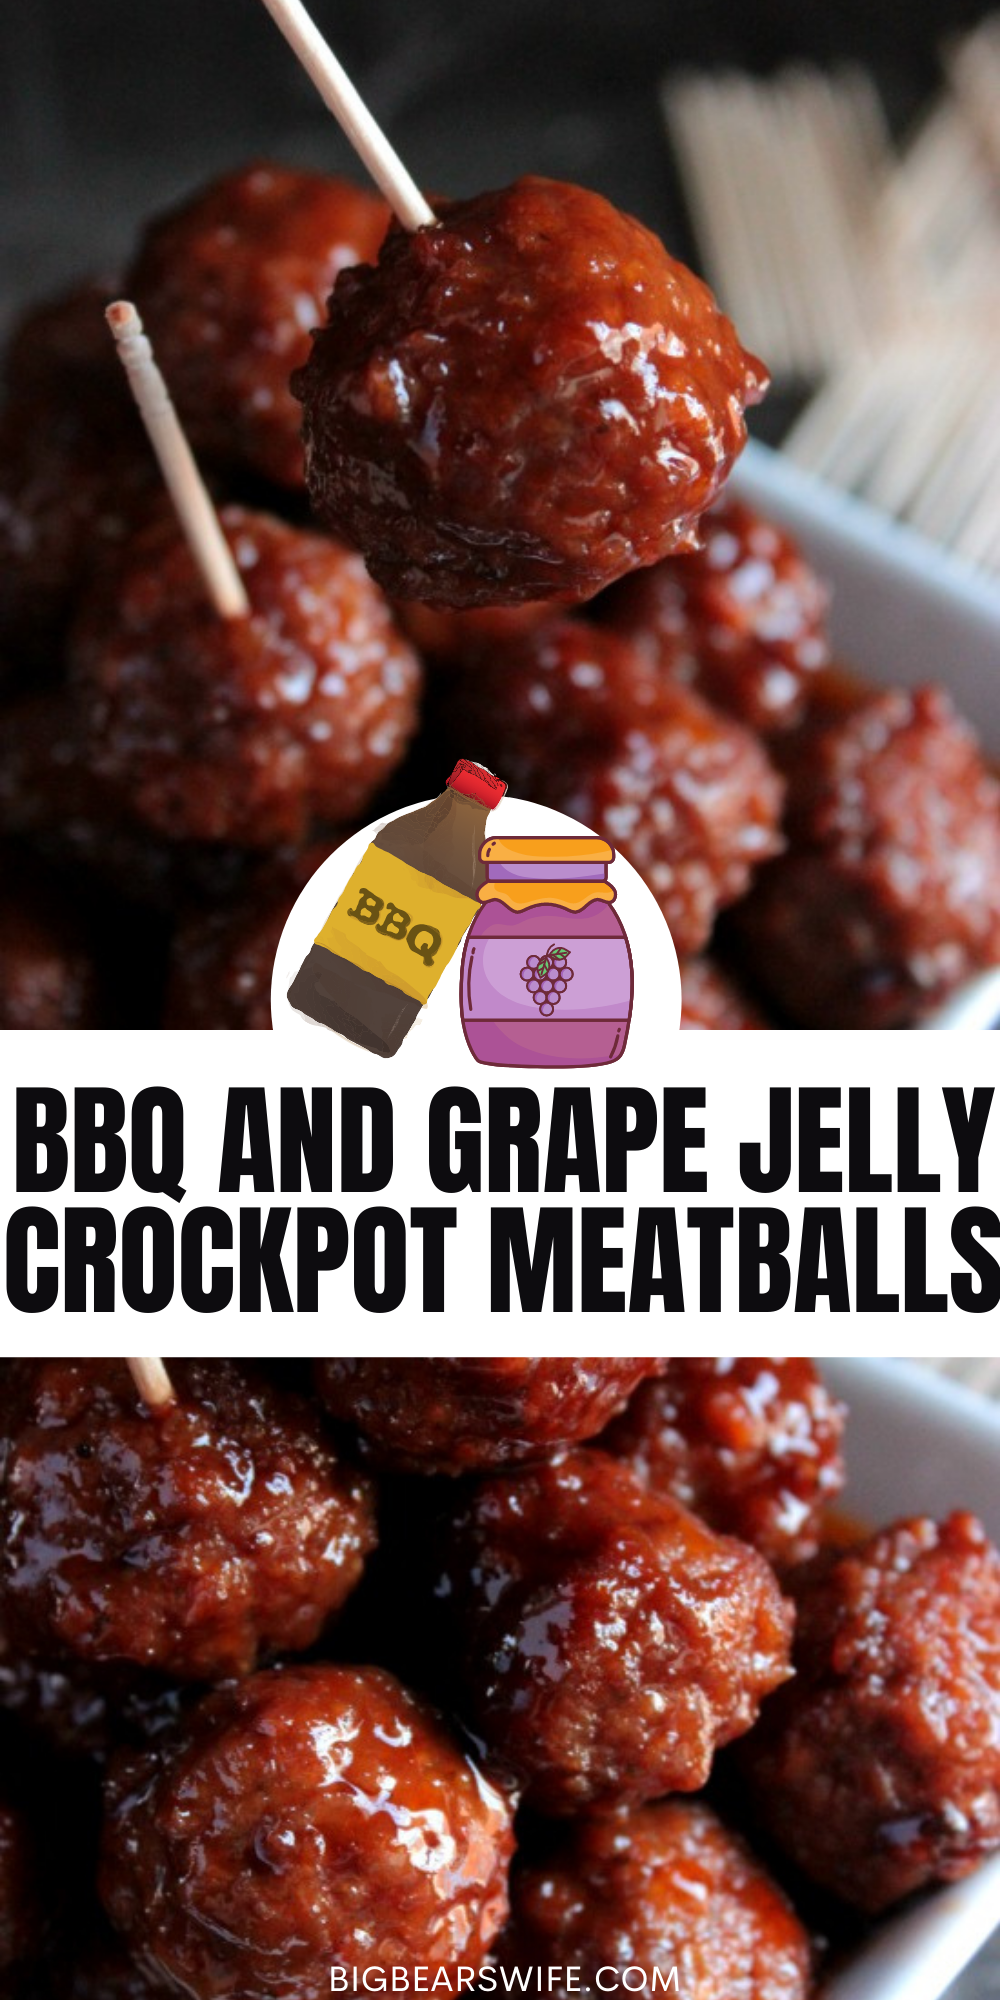 BBQ and Grape Jelly Crockpot Meatballs - a Holiday classic that we love to make each year! Meatballs slow cooked in grape jelly and BBQ sauce! - These super popular BBQ and Grape Jelly Crockpot Meatballs are always a hit at Thanksgiving at Christmas! They're super easy to make and everyone always loves them! I had no idea how easy they were until my mom showed me how to make them!  via @bigbearswife